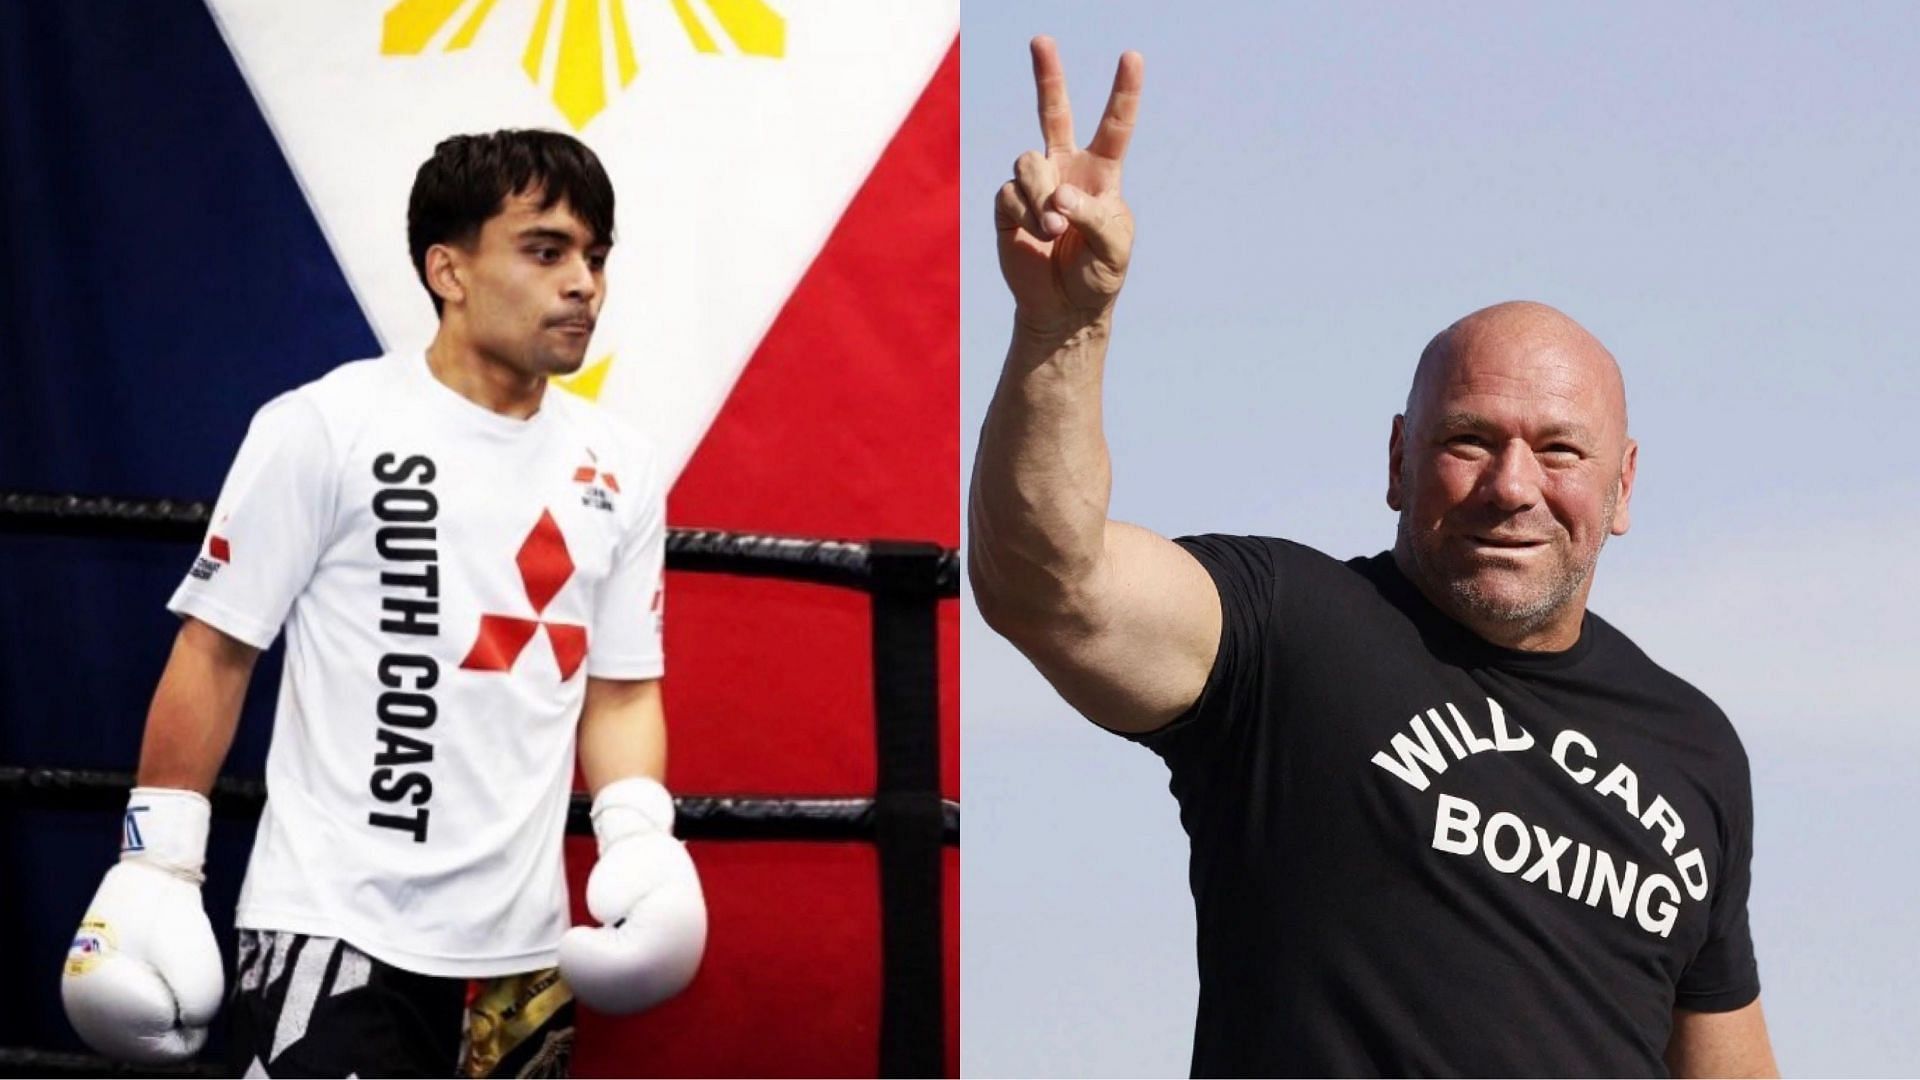 Manny Pacquiao Jr. (left) and Dana White (right) [images courtesy of Instagram and Getty]